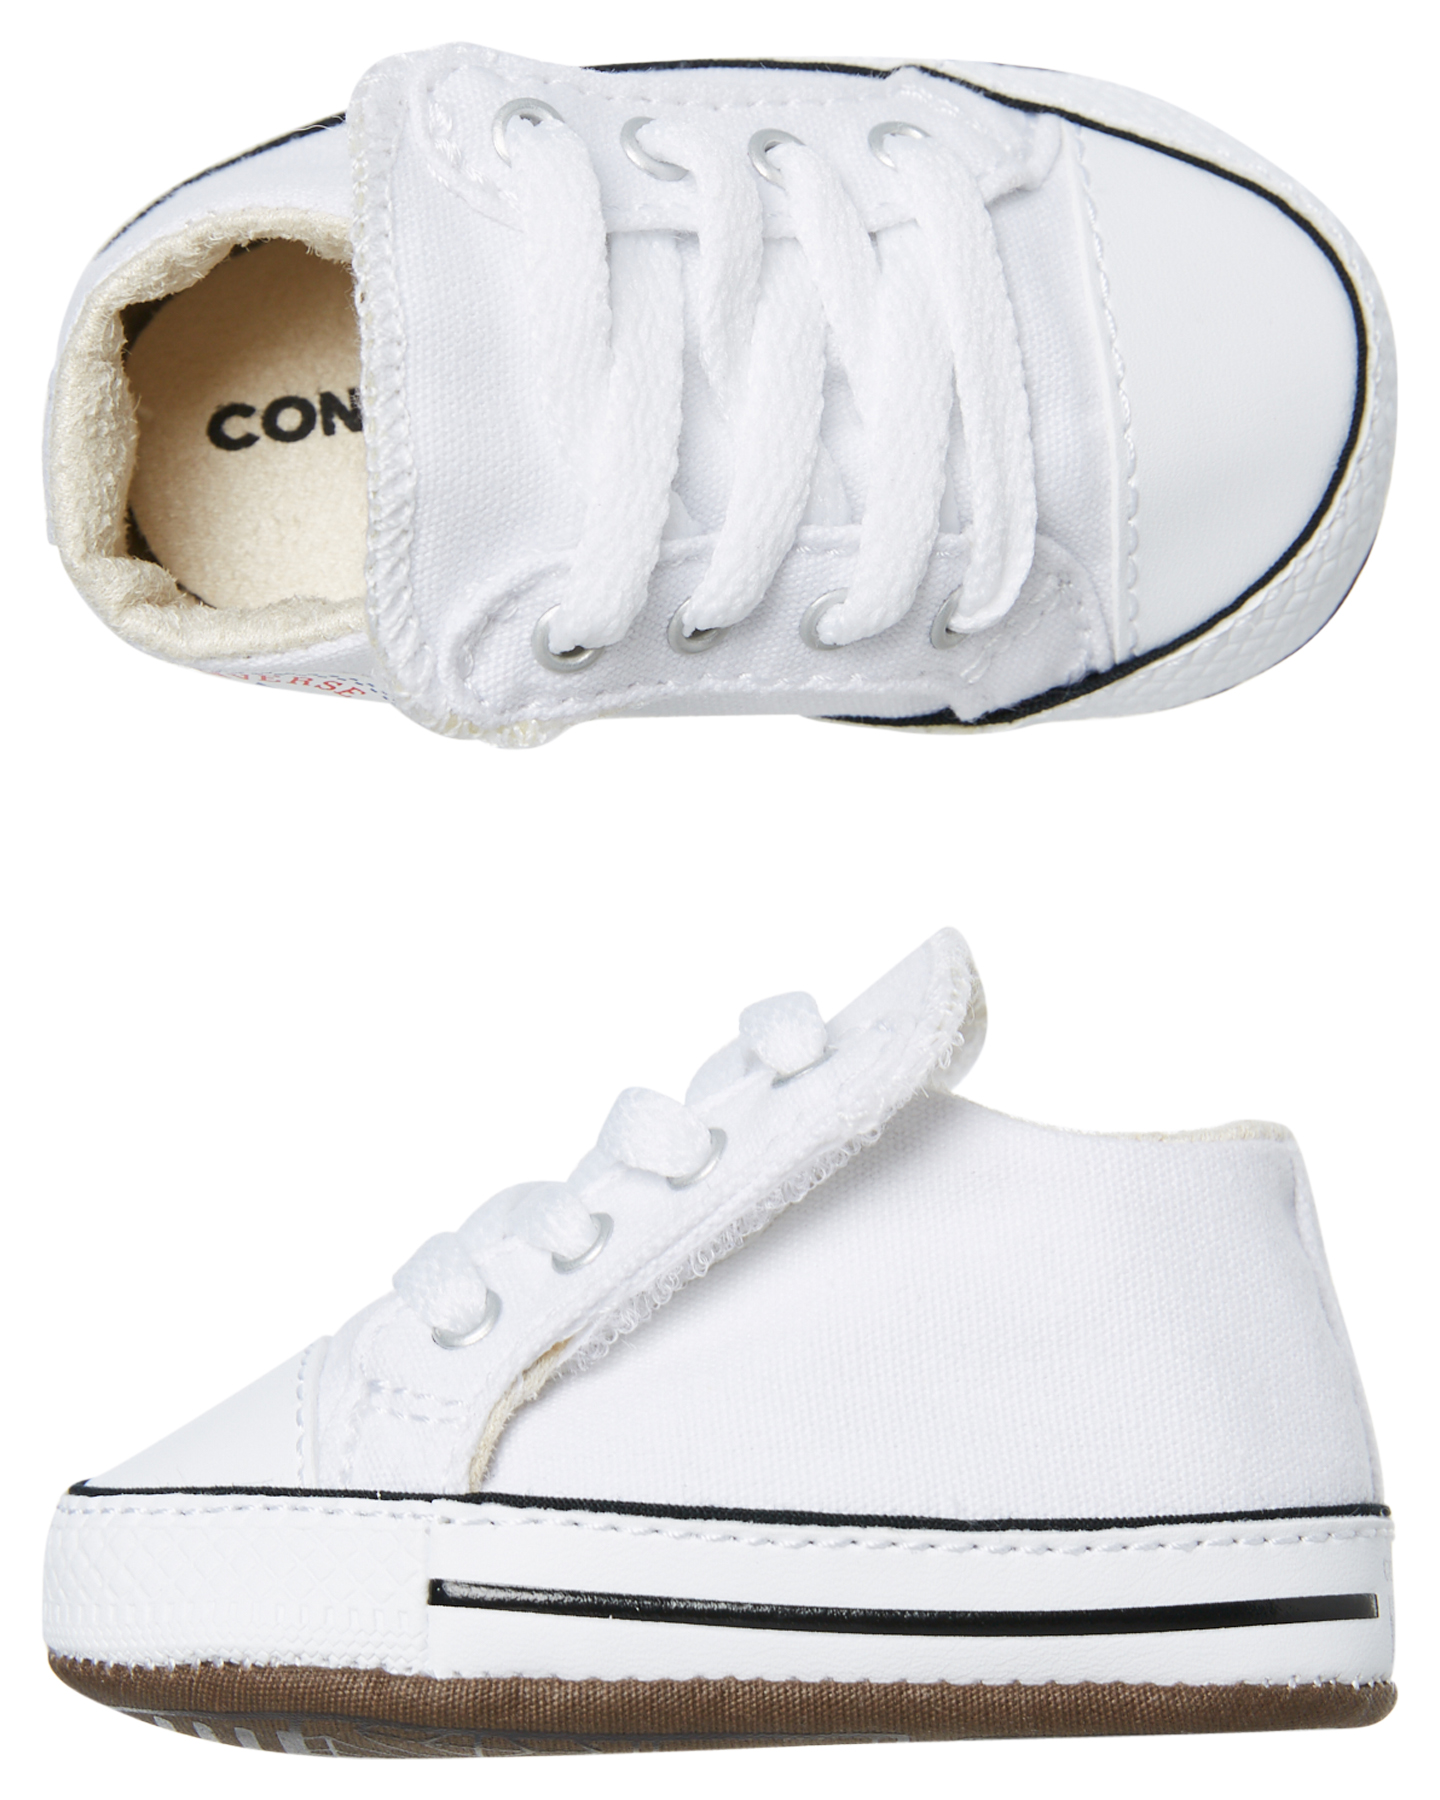 converse all star size chart